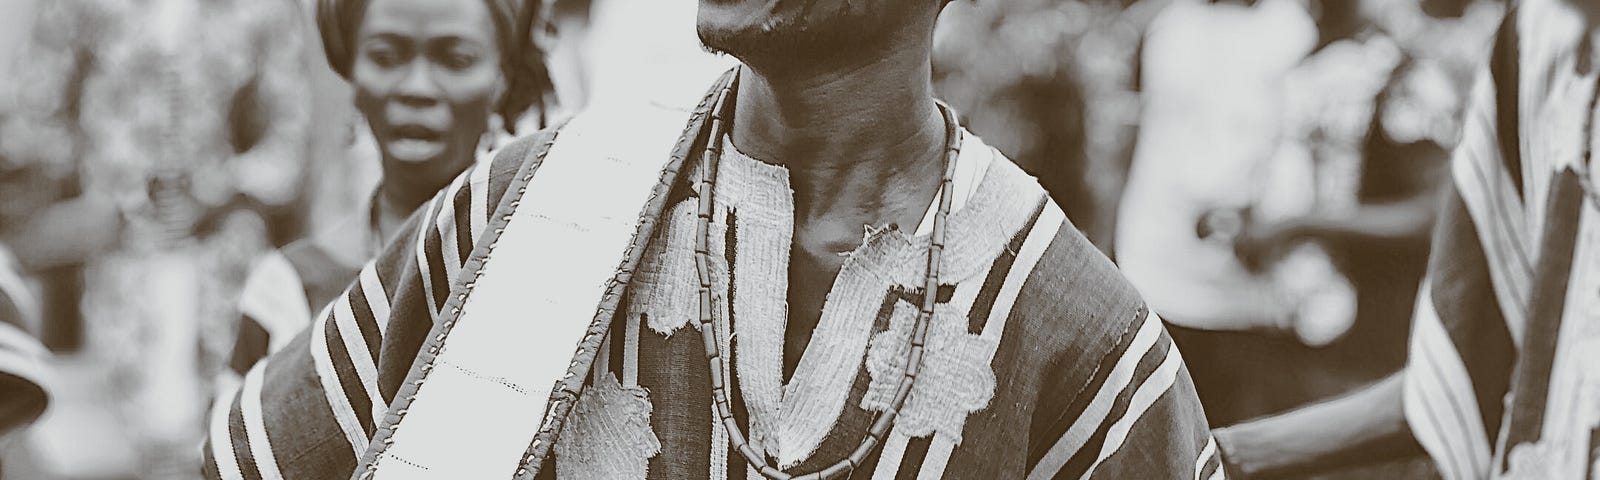 Image of a western Nigerian man playing a talking drum, small businesses need to be loud to connect in the age of distraction